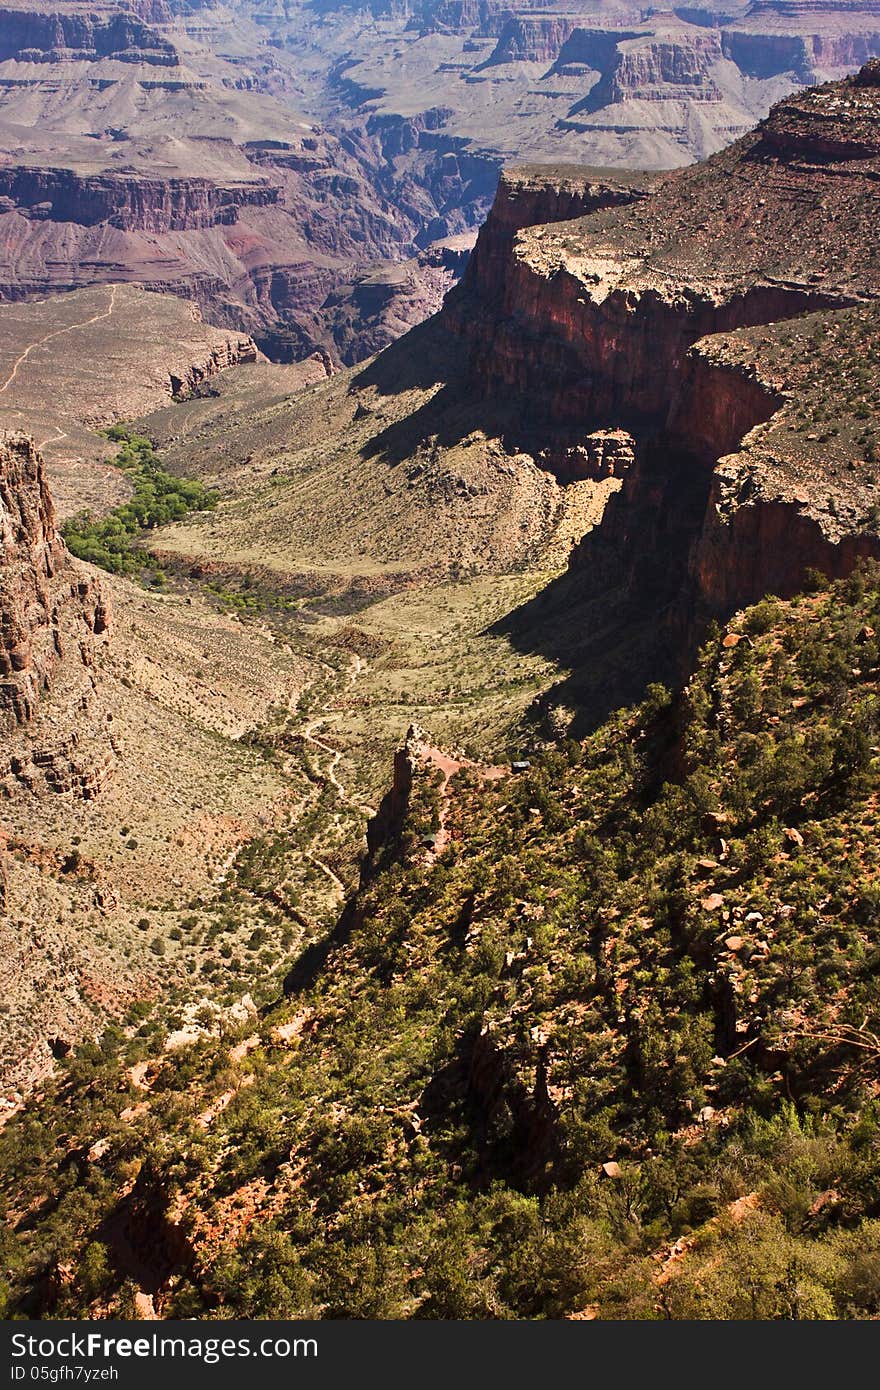 Photo of the grand canyon